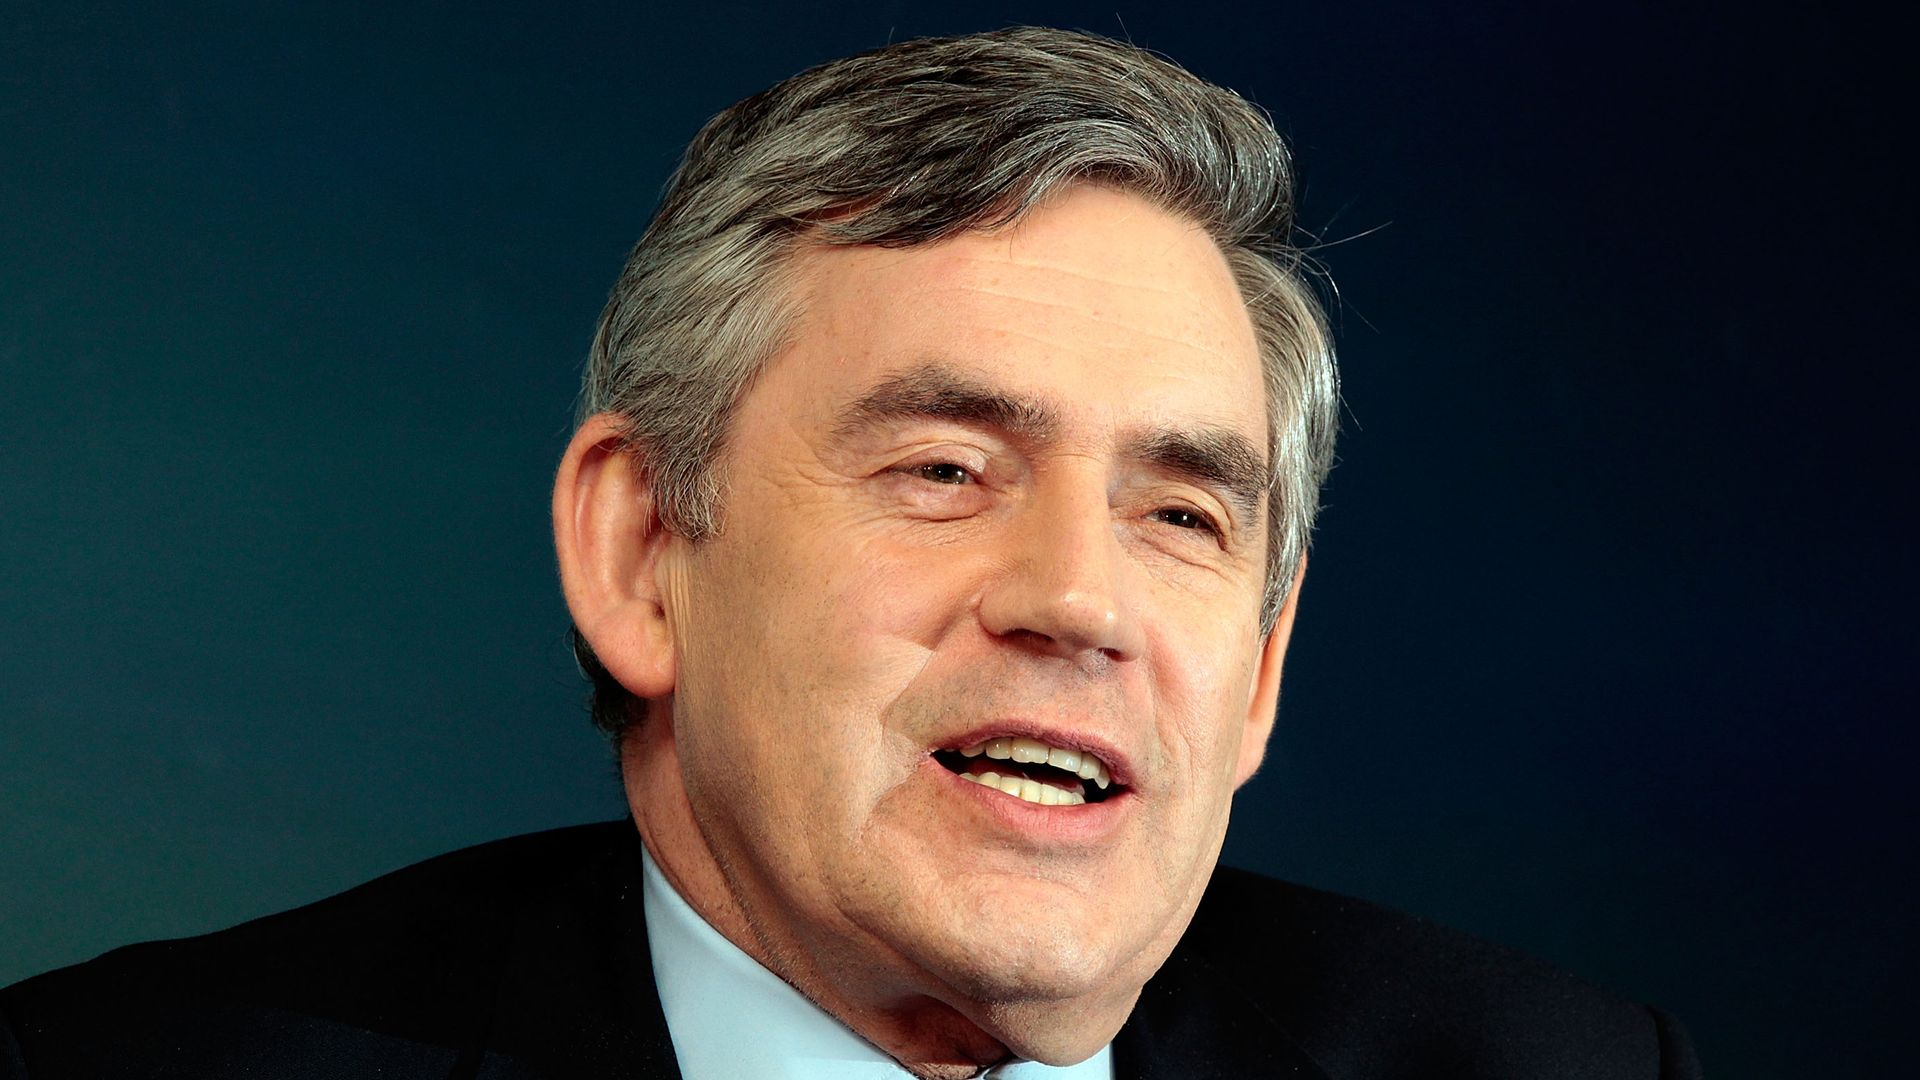 Gordon Brown speaking at a press conference